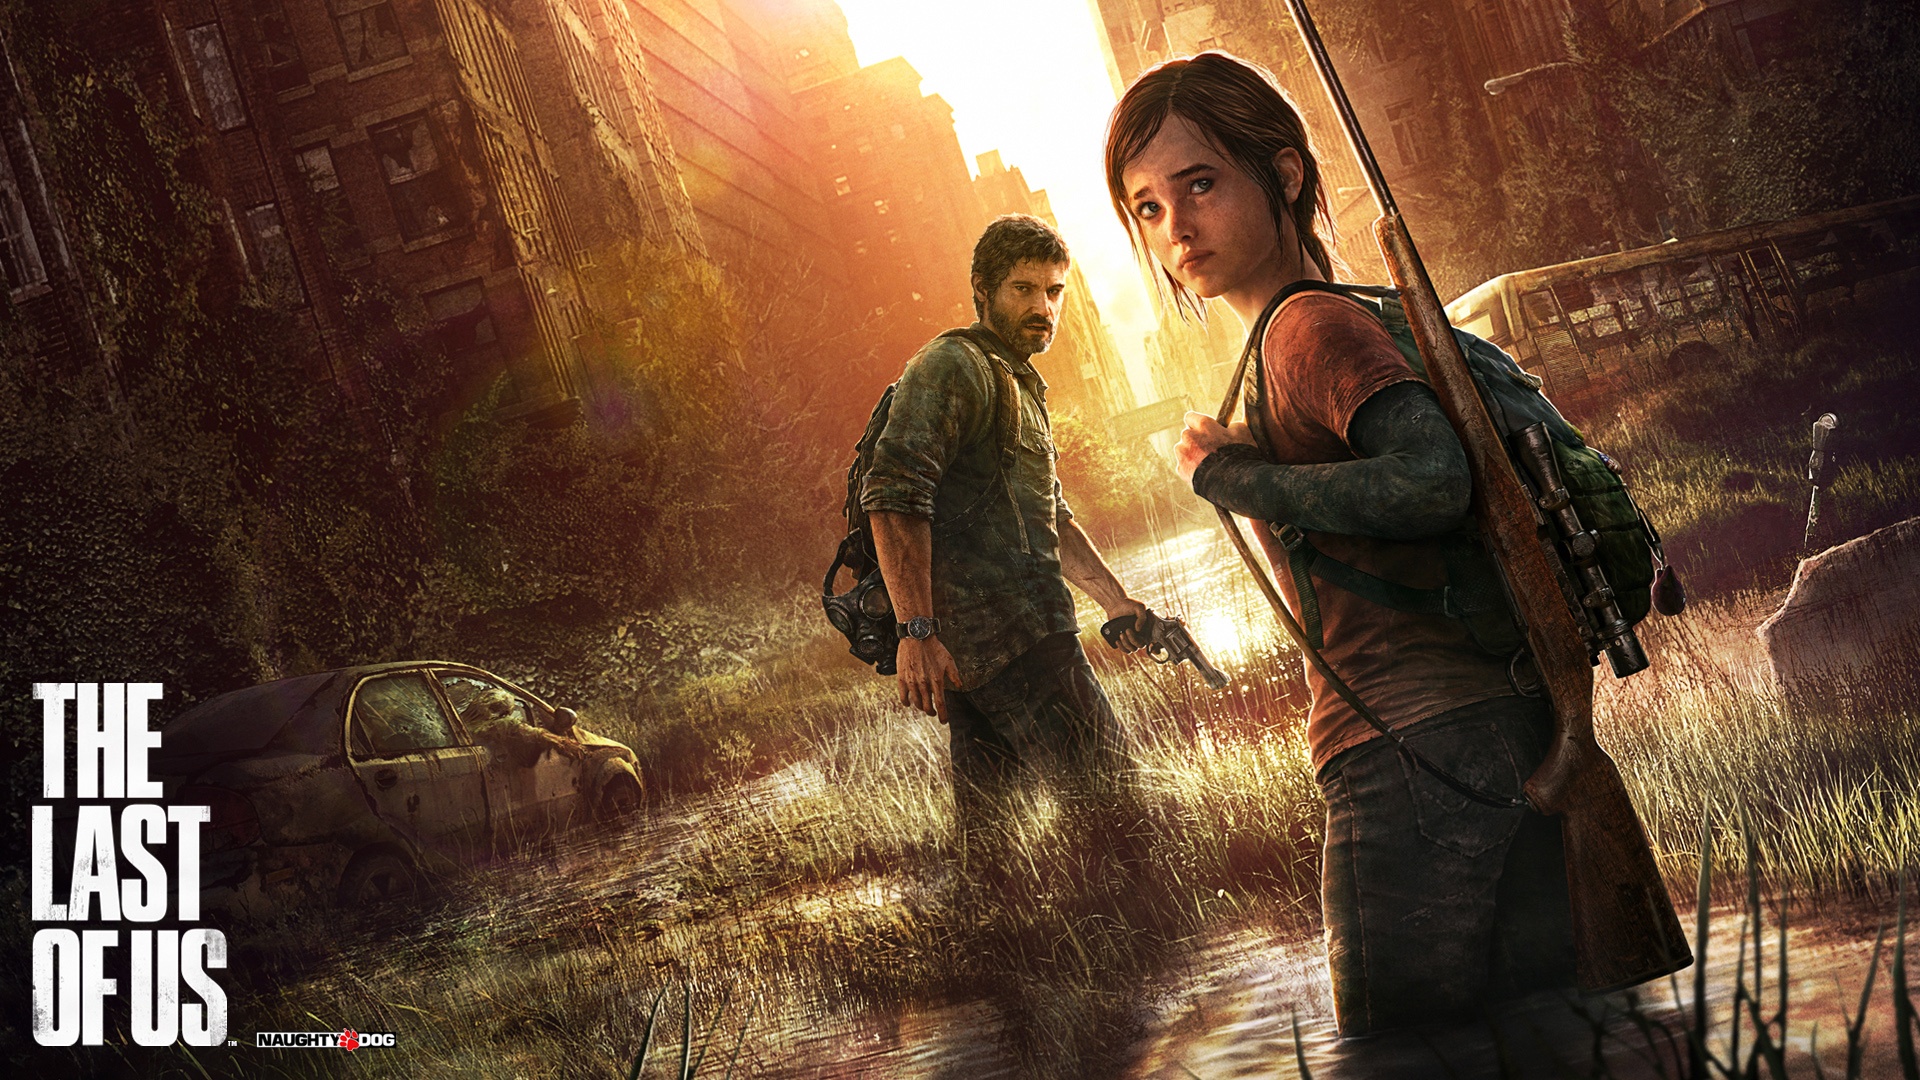 the last of us wallpaper,action adventure game,adventure game,movie,pc game,games